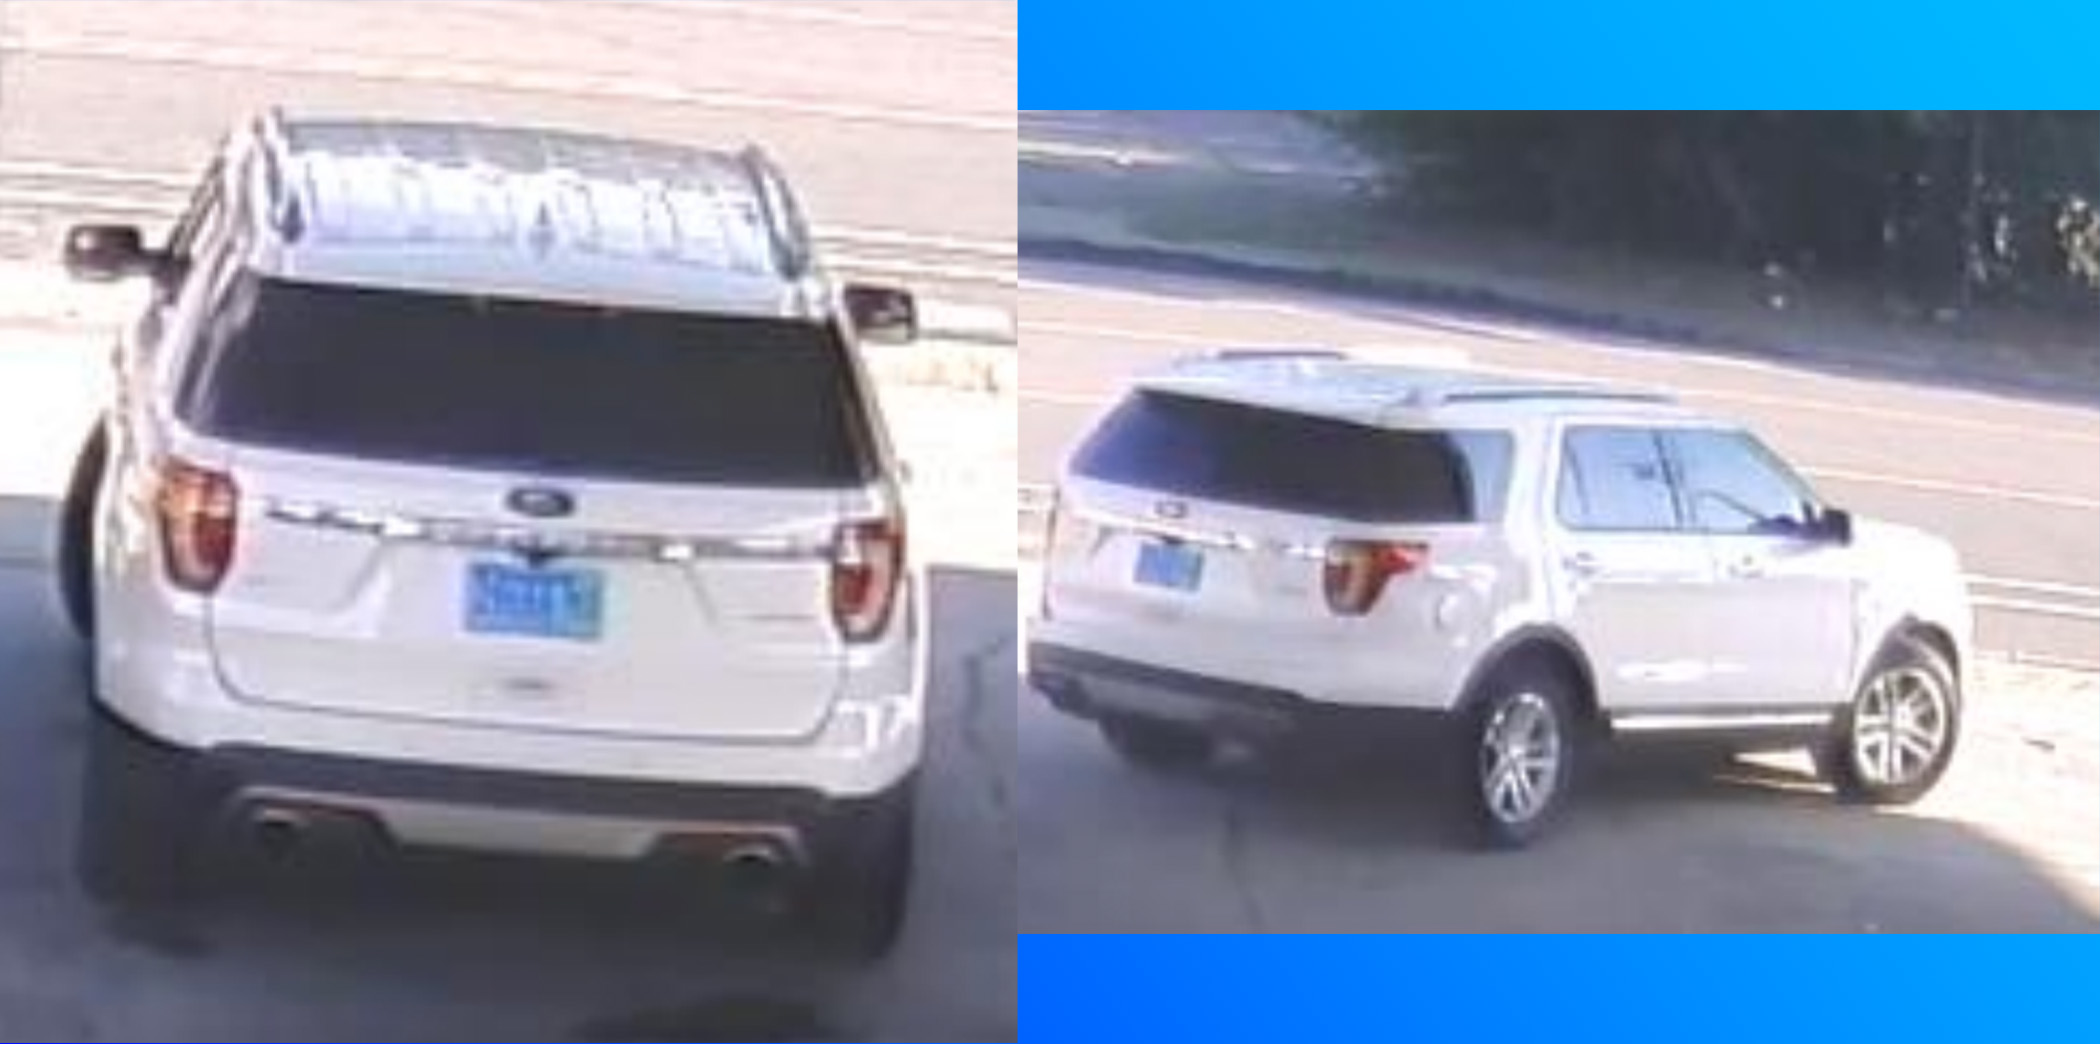 Birmingham PD seeks vehicle possibly involved in recent shootings